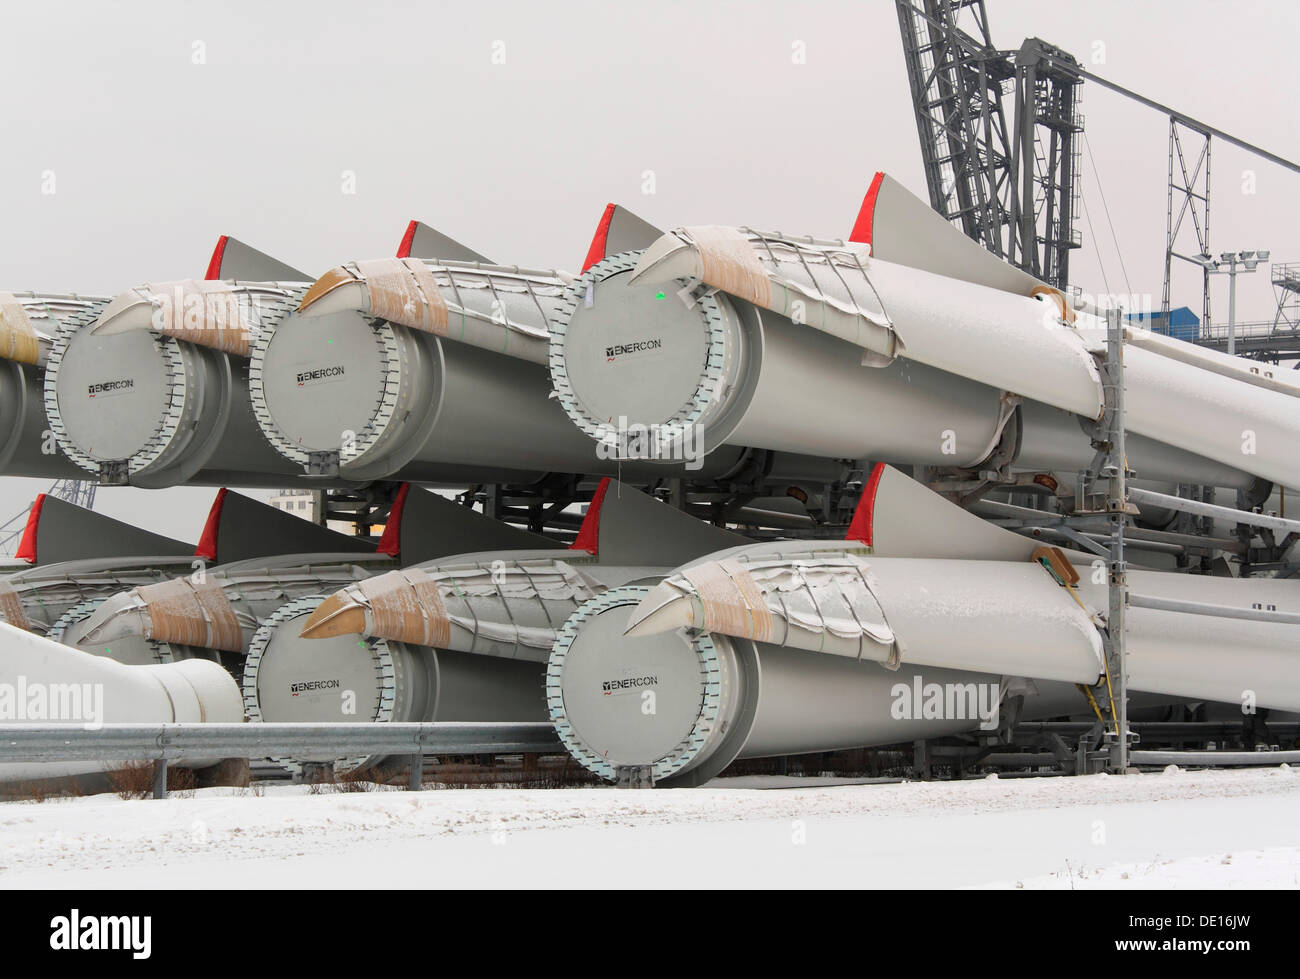 Stacked rotor blades ready to transport, for wind turbines, new inland port, Emden, East Frisia, Lower Saxony Stock Photo